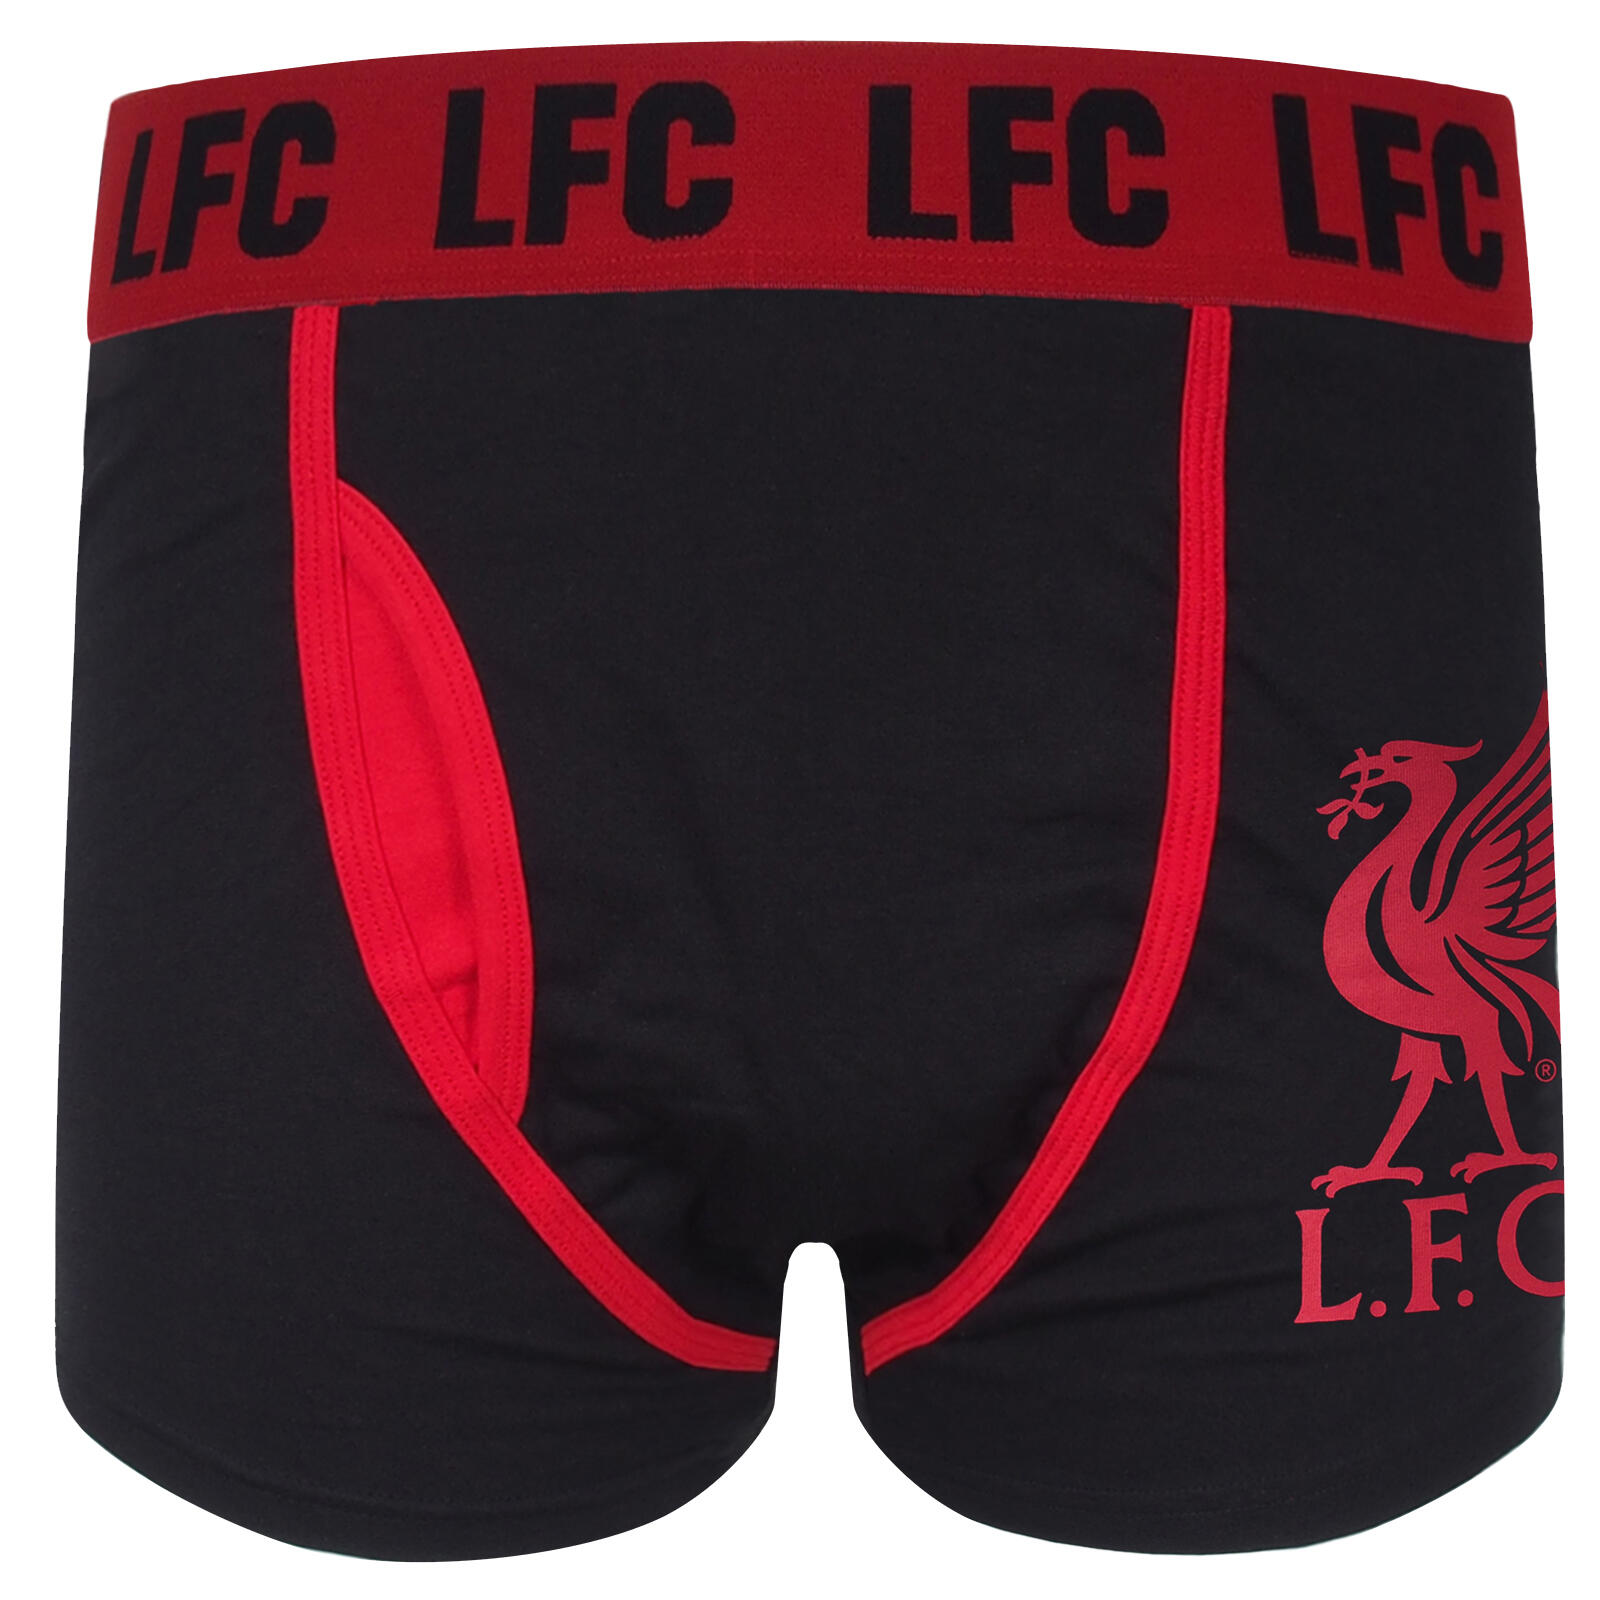 LIVERPOOL FC Liverpool FC Mens Boxer Shorts Premium Crest OFFICIAL Football Gift